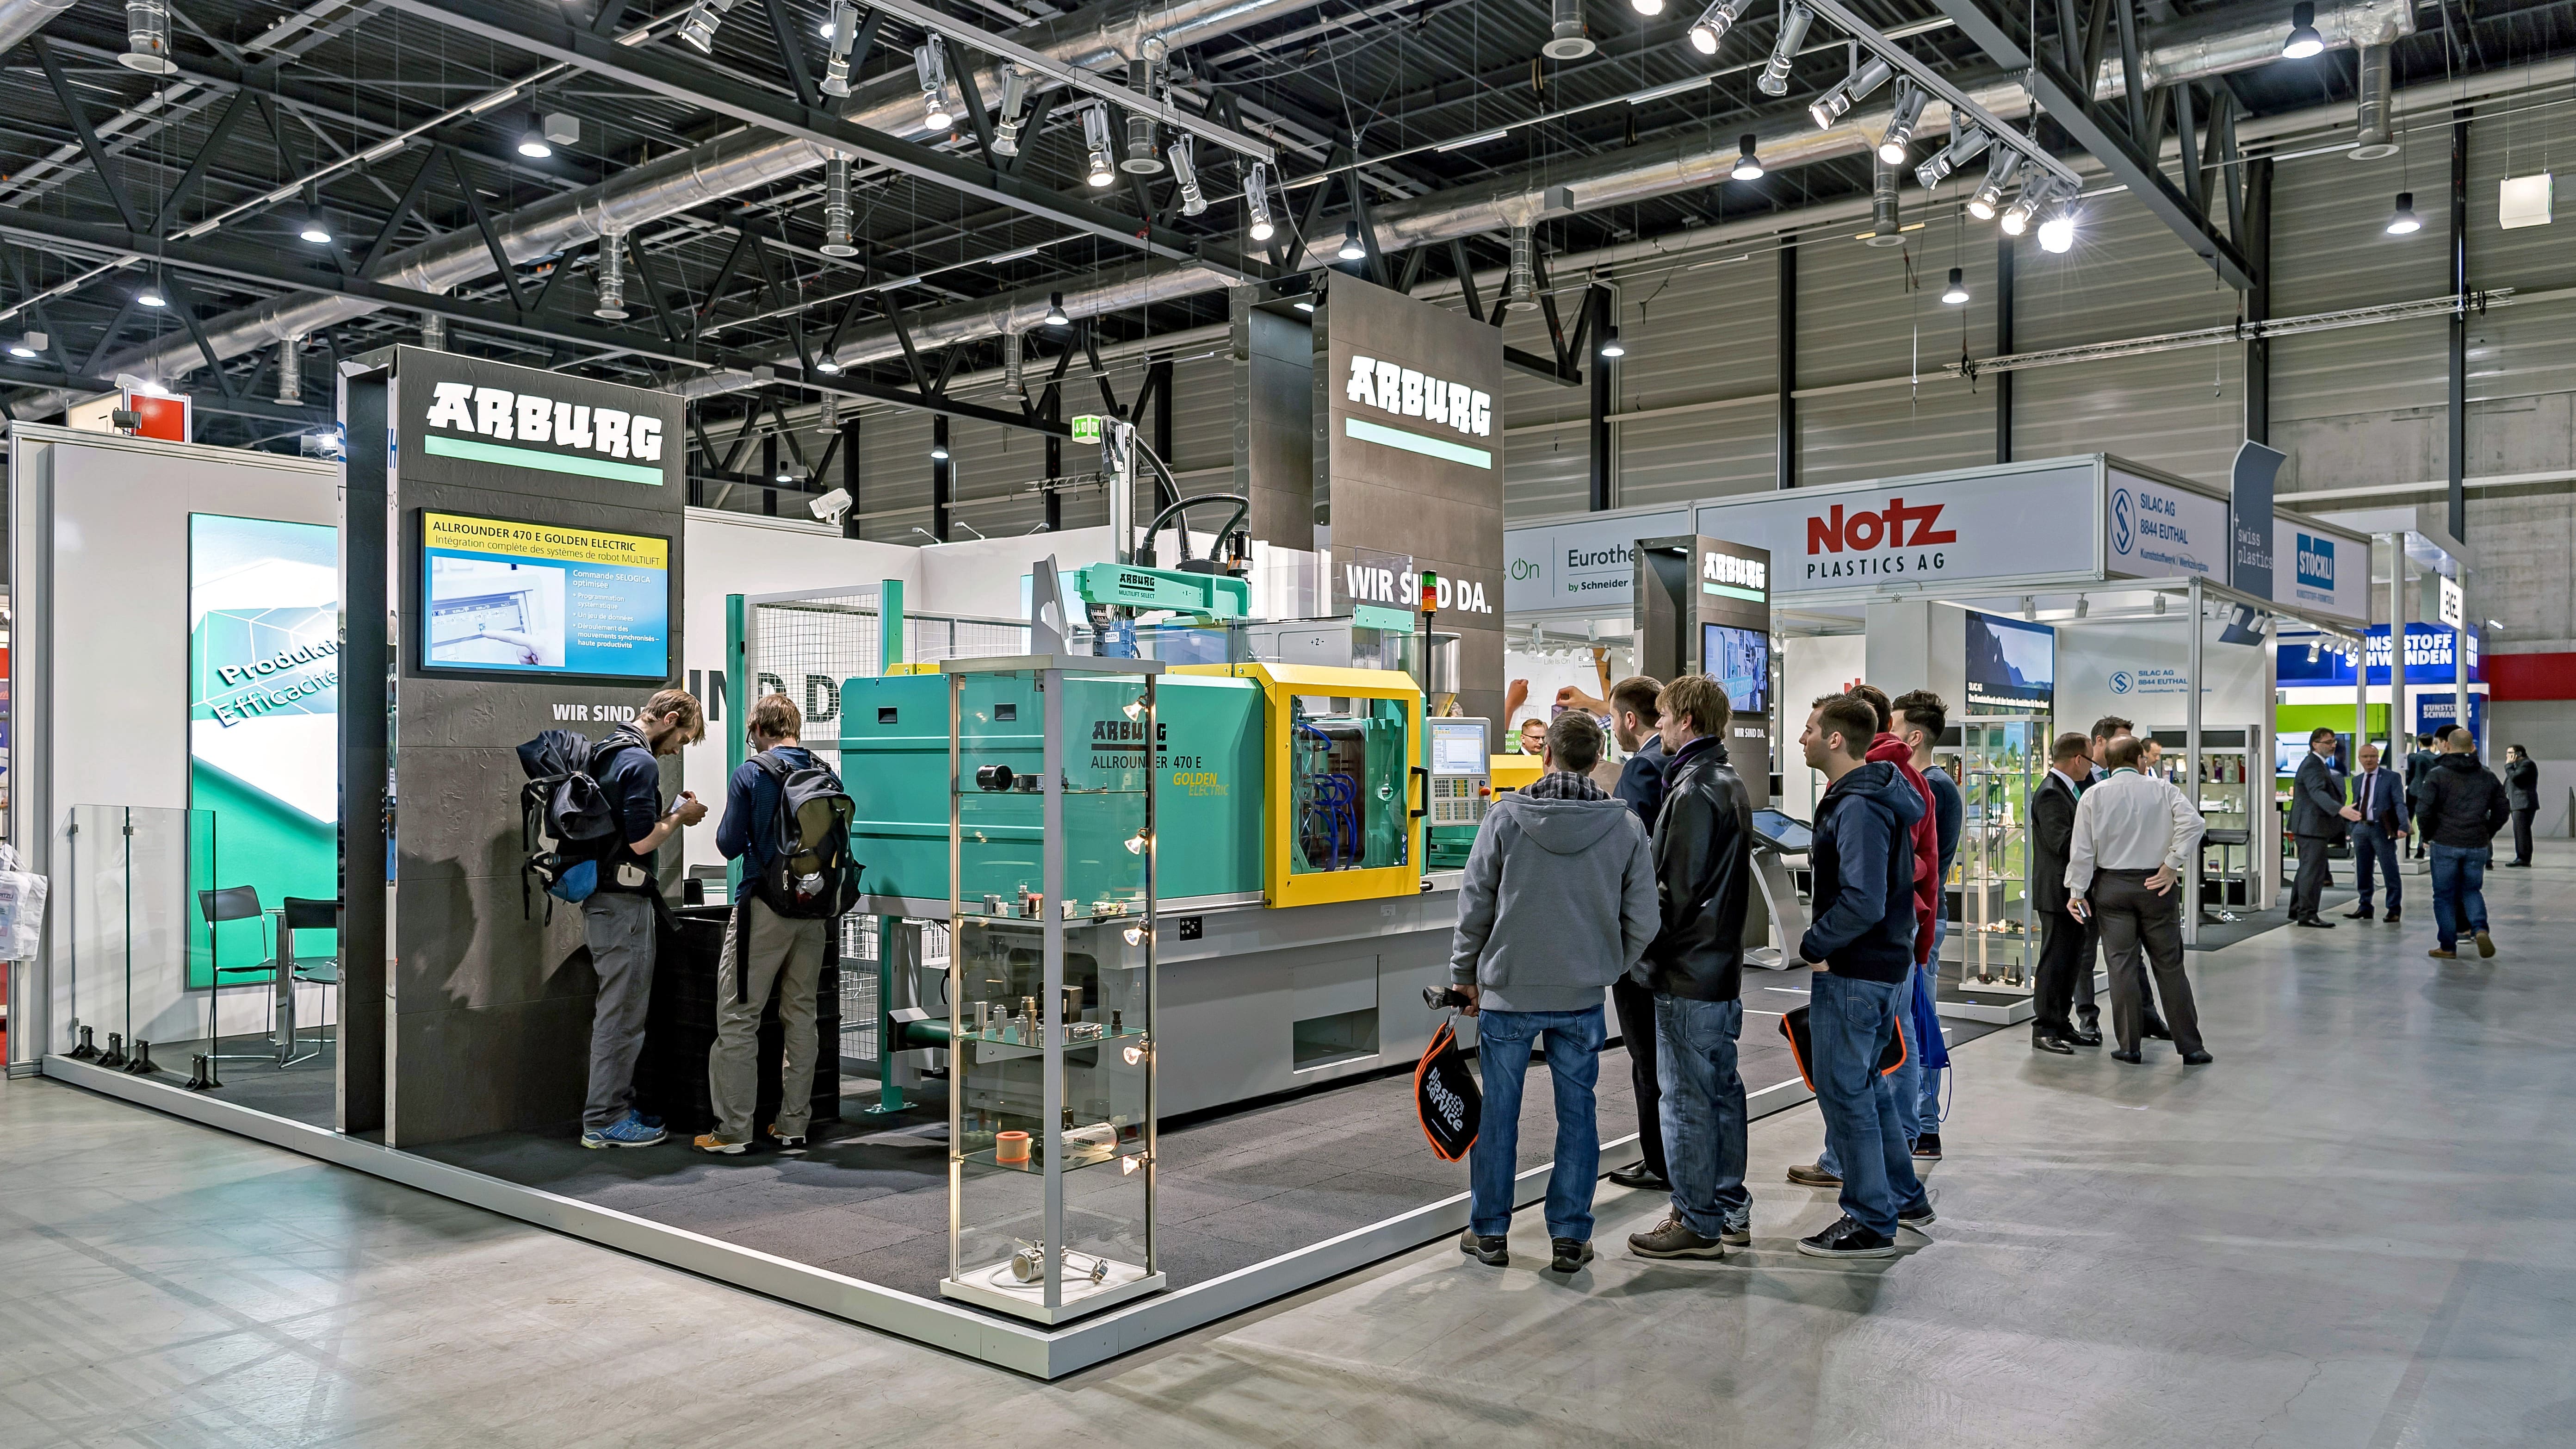 Create your personal to-do list in preparation of your visit to the Swiss Plastics Expo